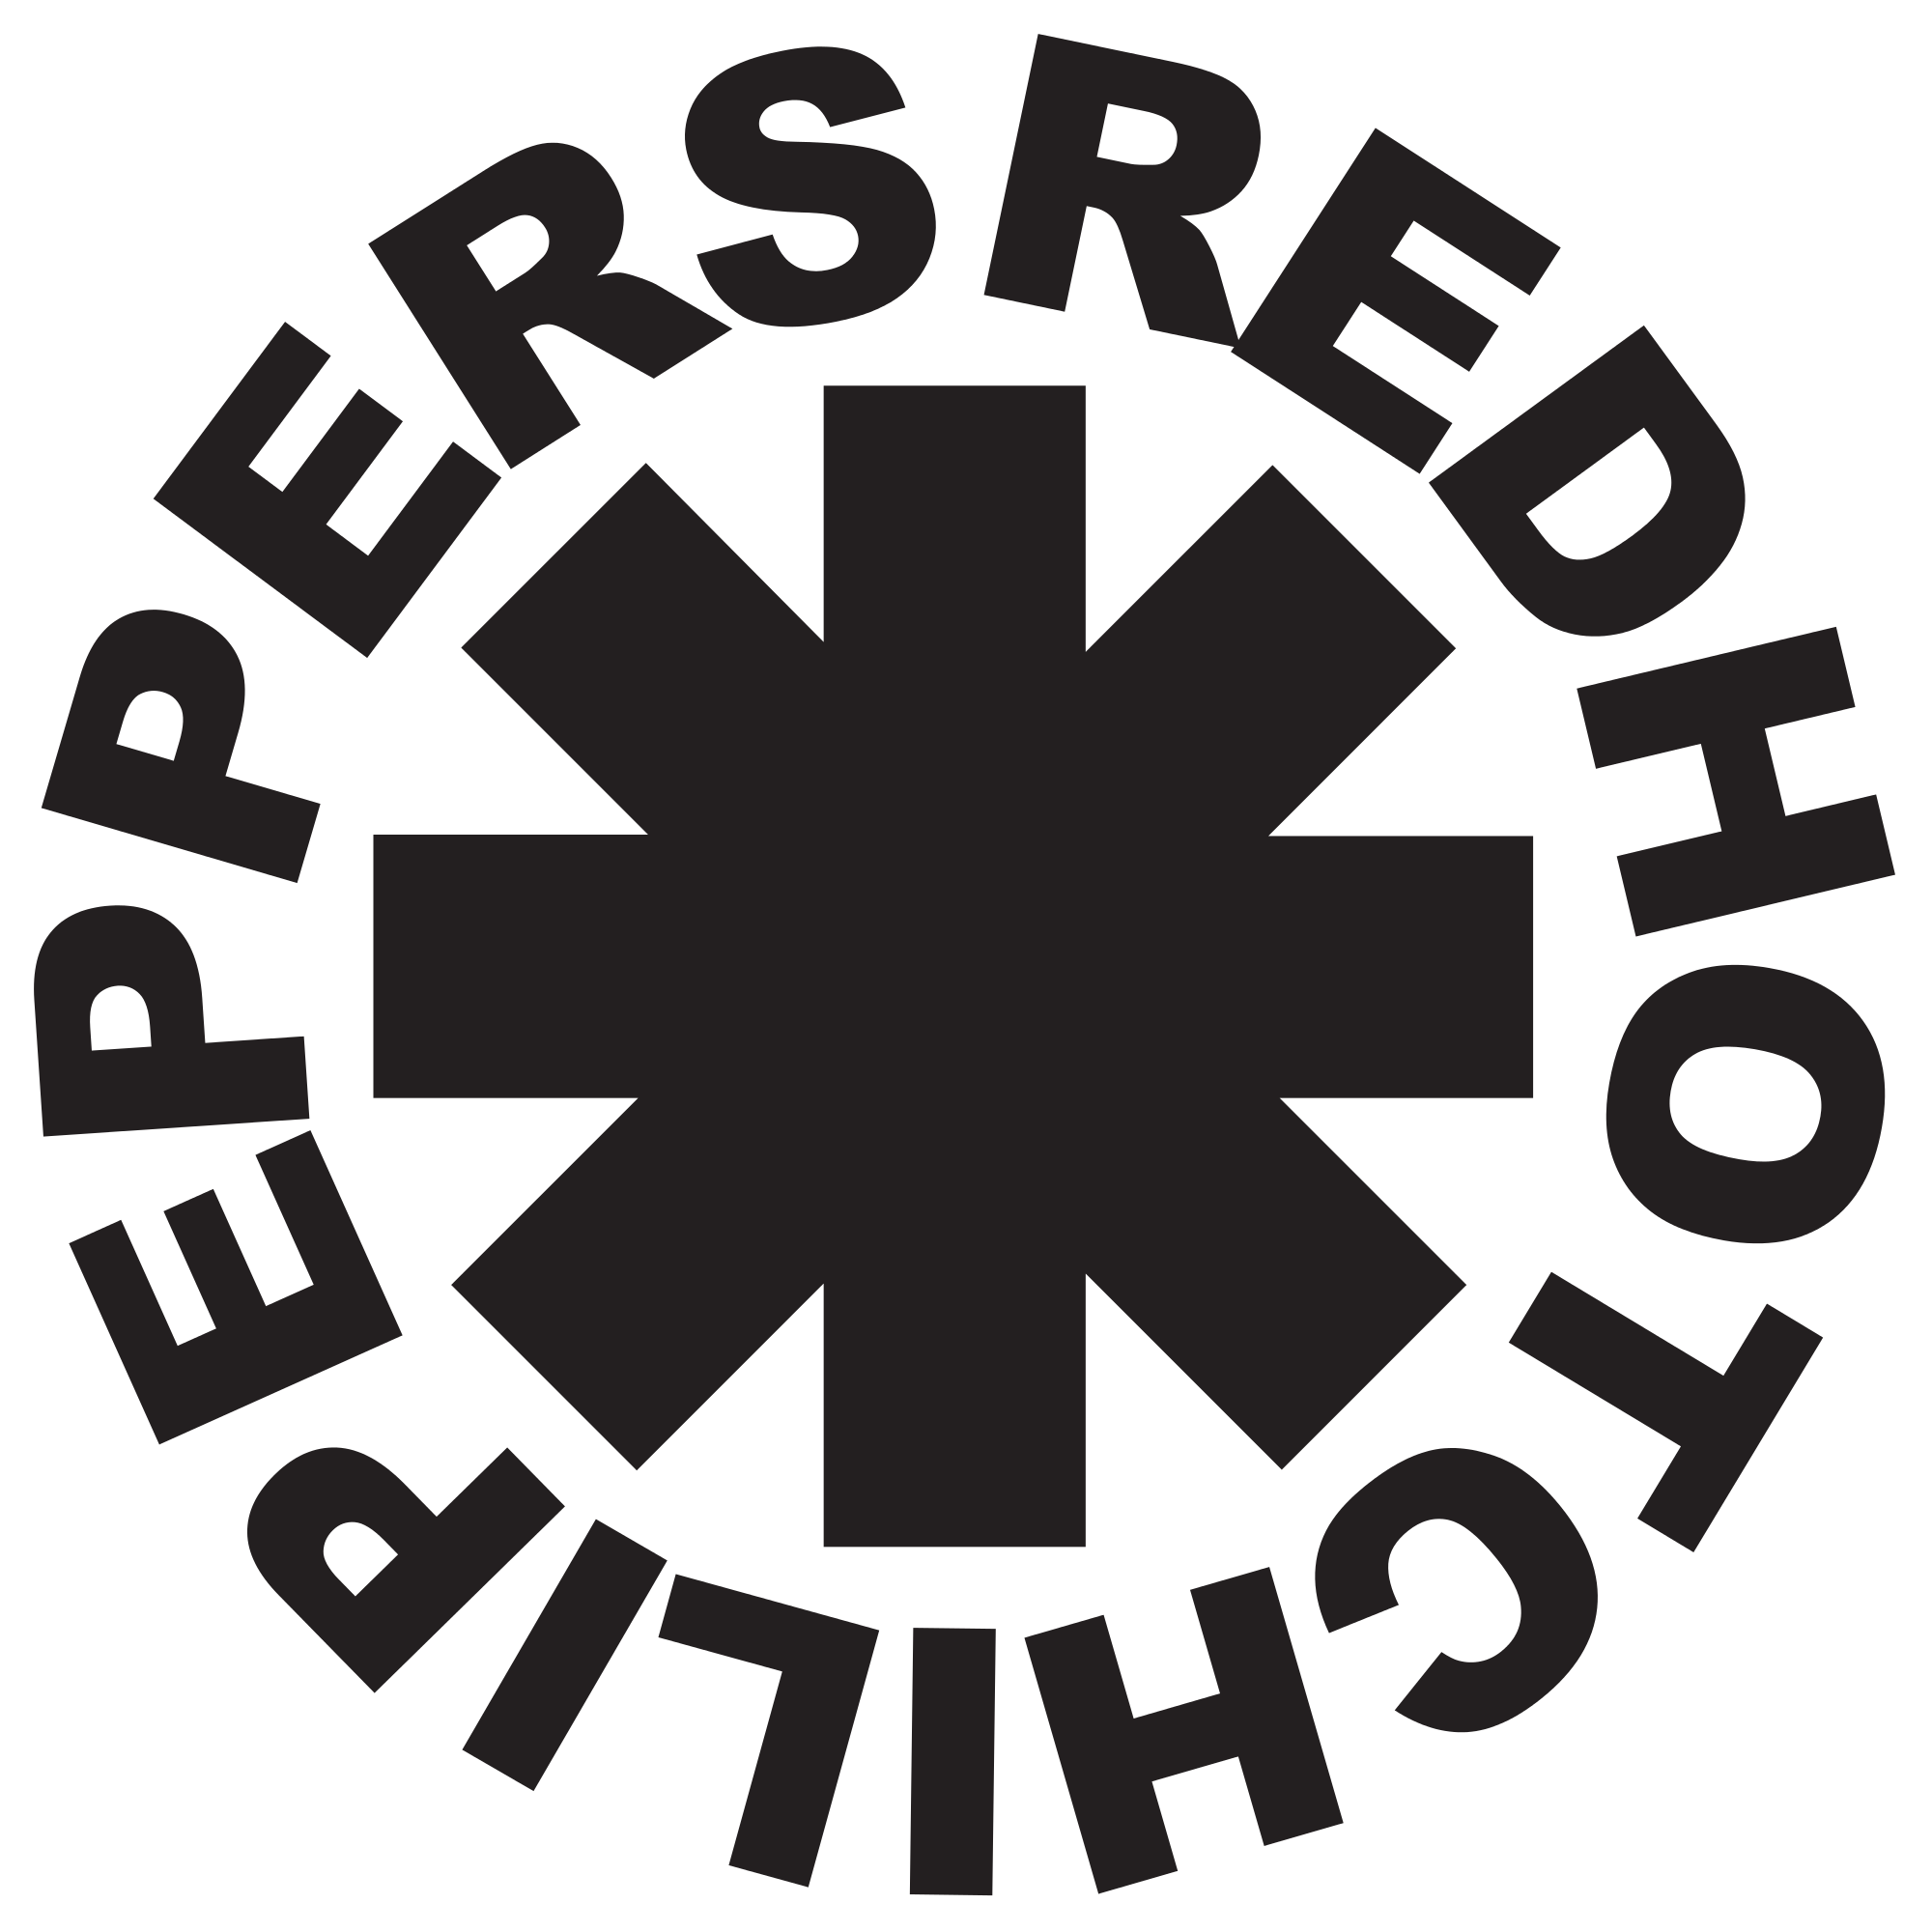 Red and White Y Logo - File:Redgotchilipeppers-logo.svg - Wikimedia Commons